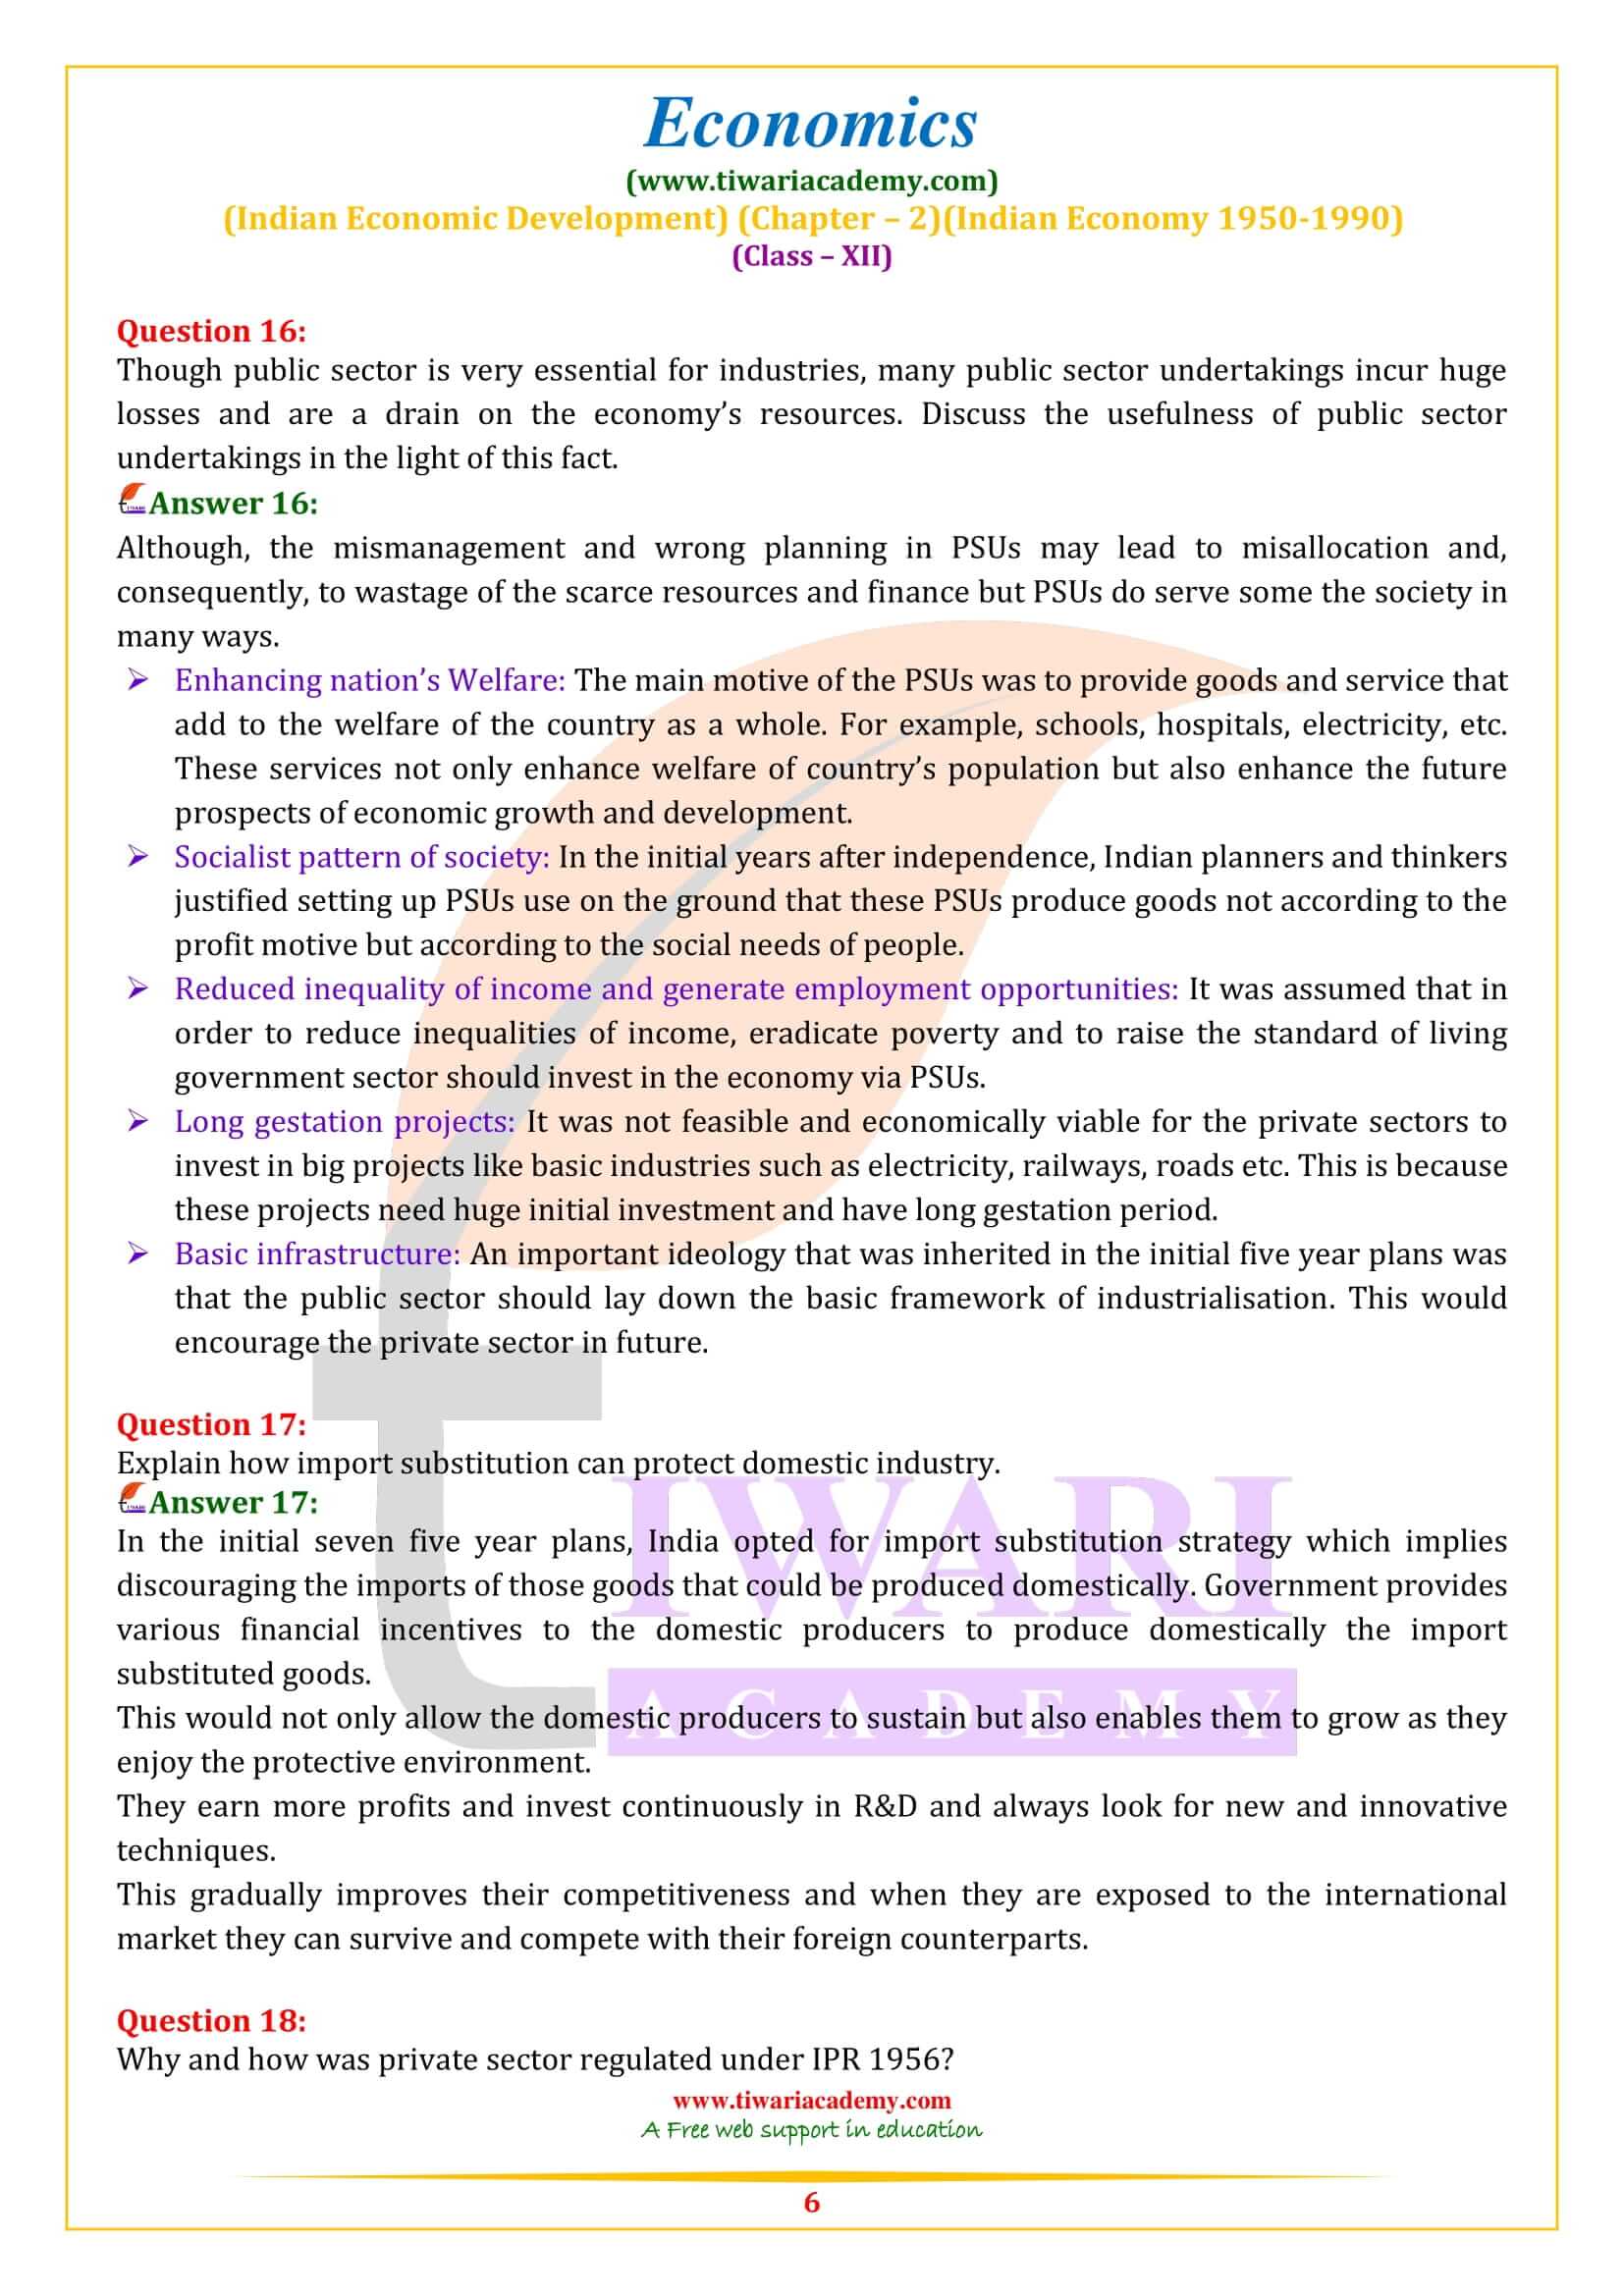 Class 12 Indian Economic Development Chapter 2 extra questions answers